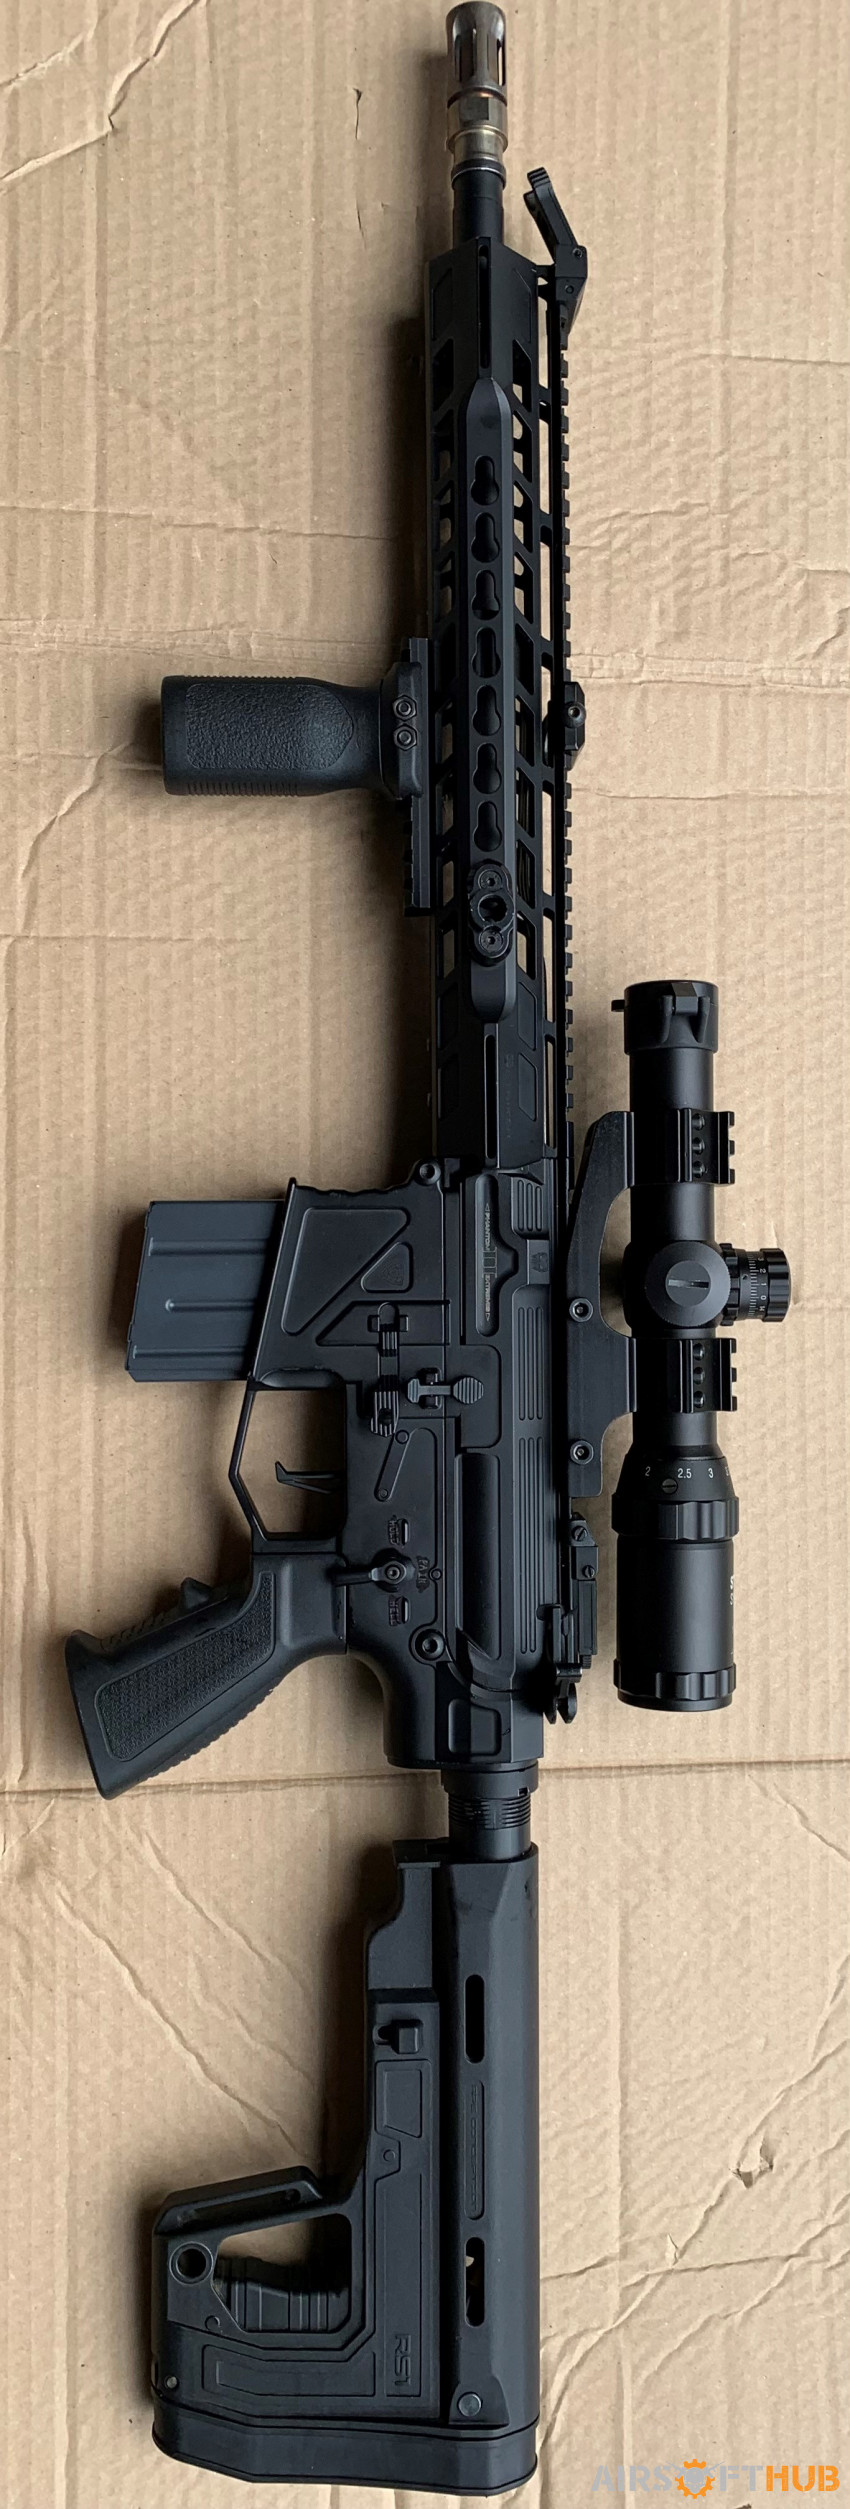 APS M4 DMR - Used airsoft equipment